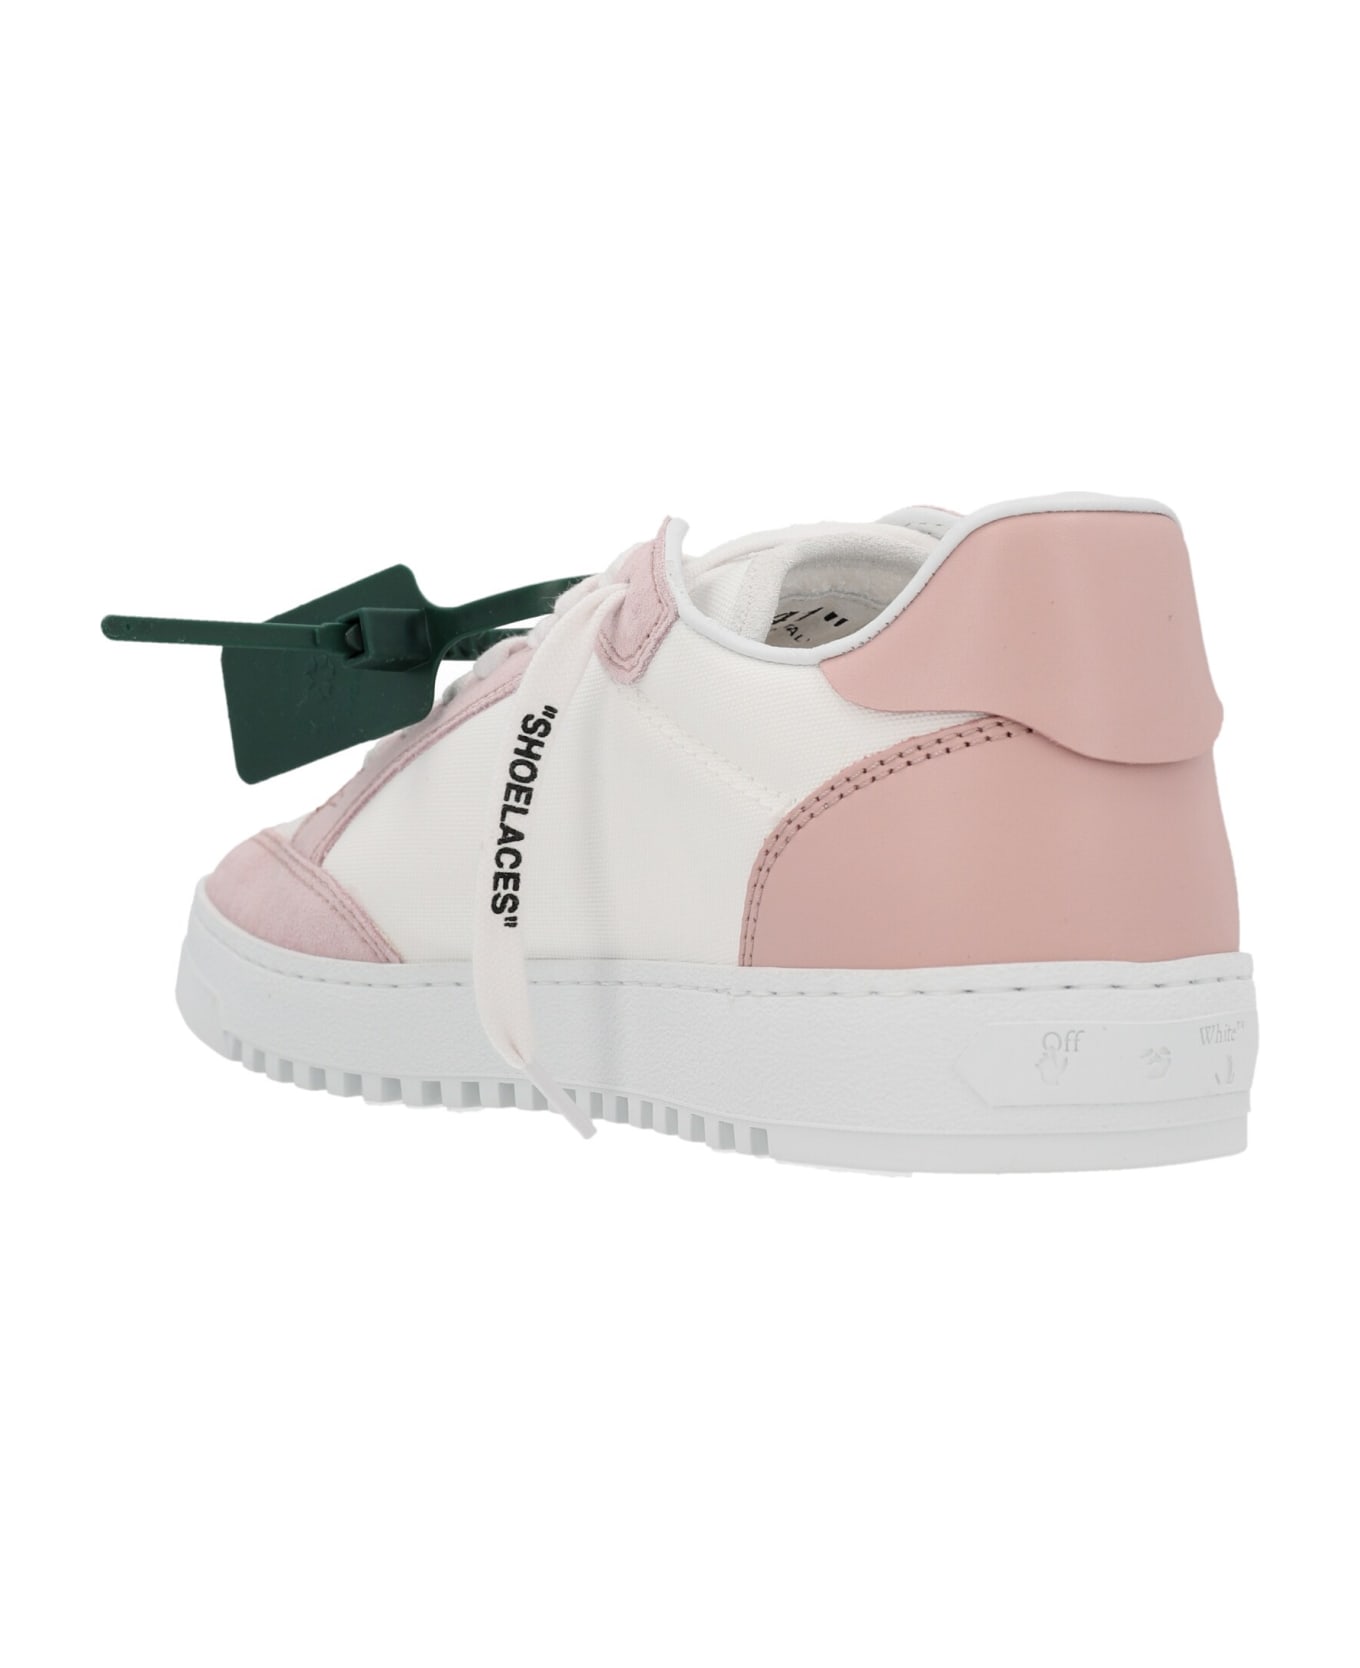 Off-White '5.0' Sneakers - Pink